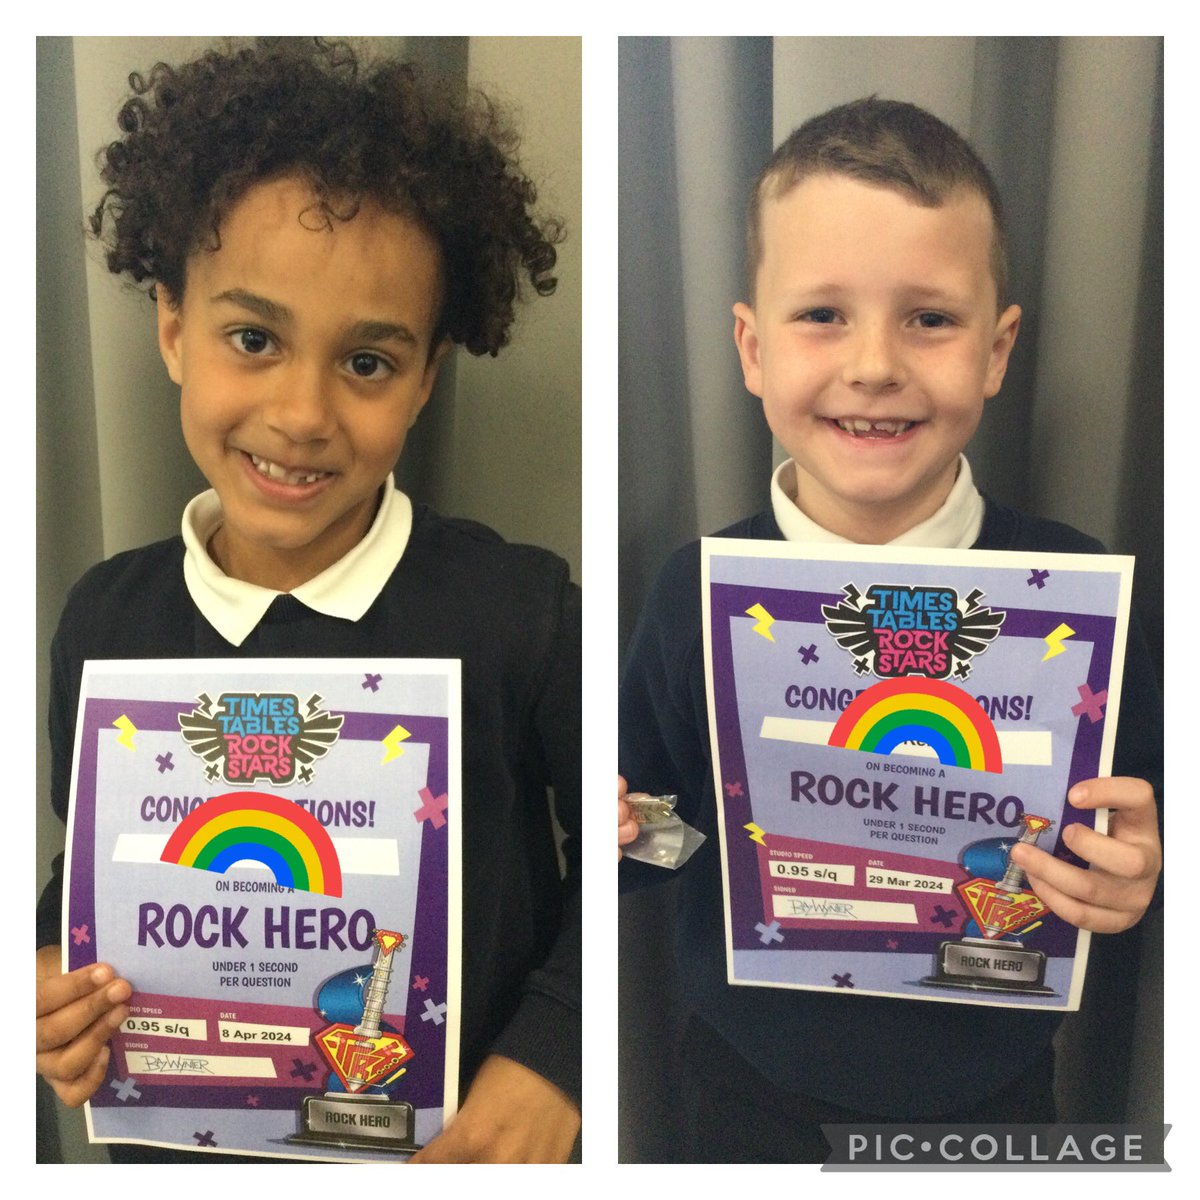 And two new Rock Heroes! ✨💫@TTRockStars